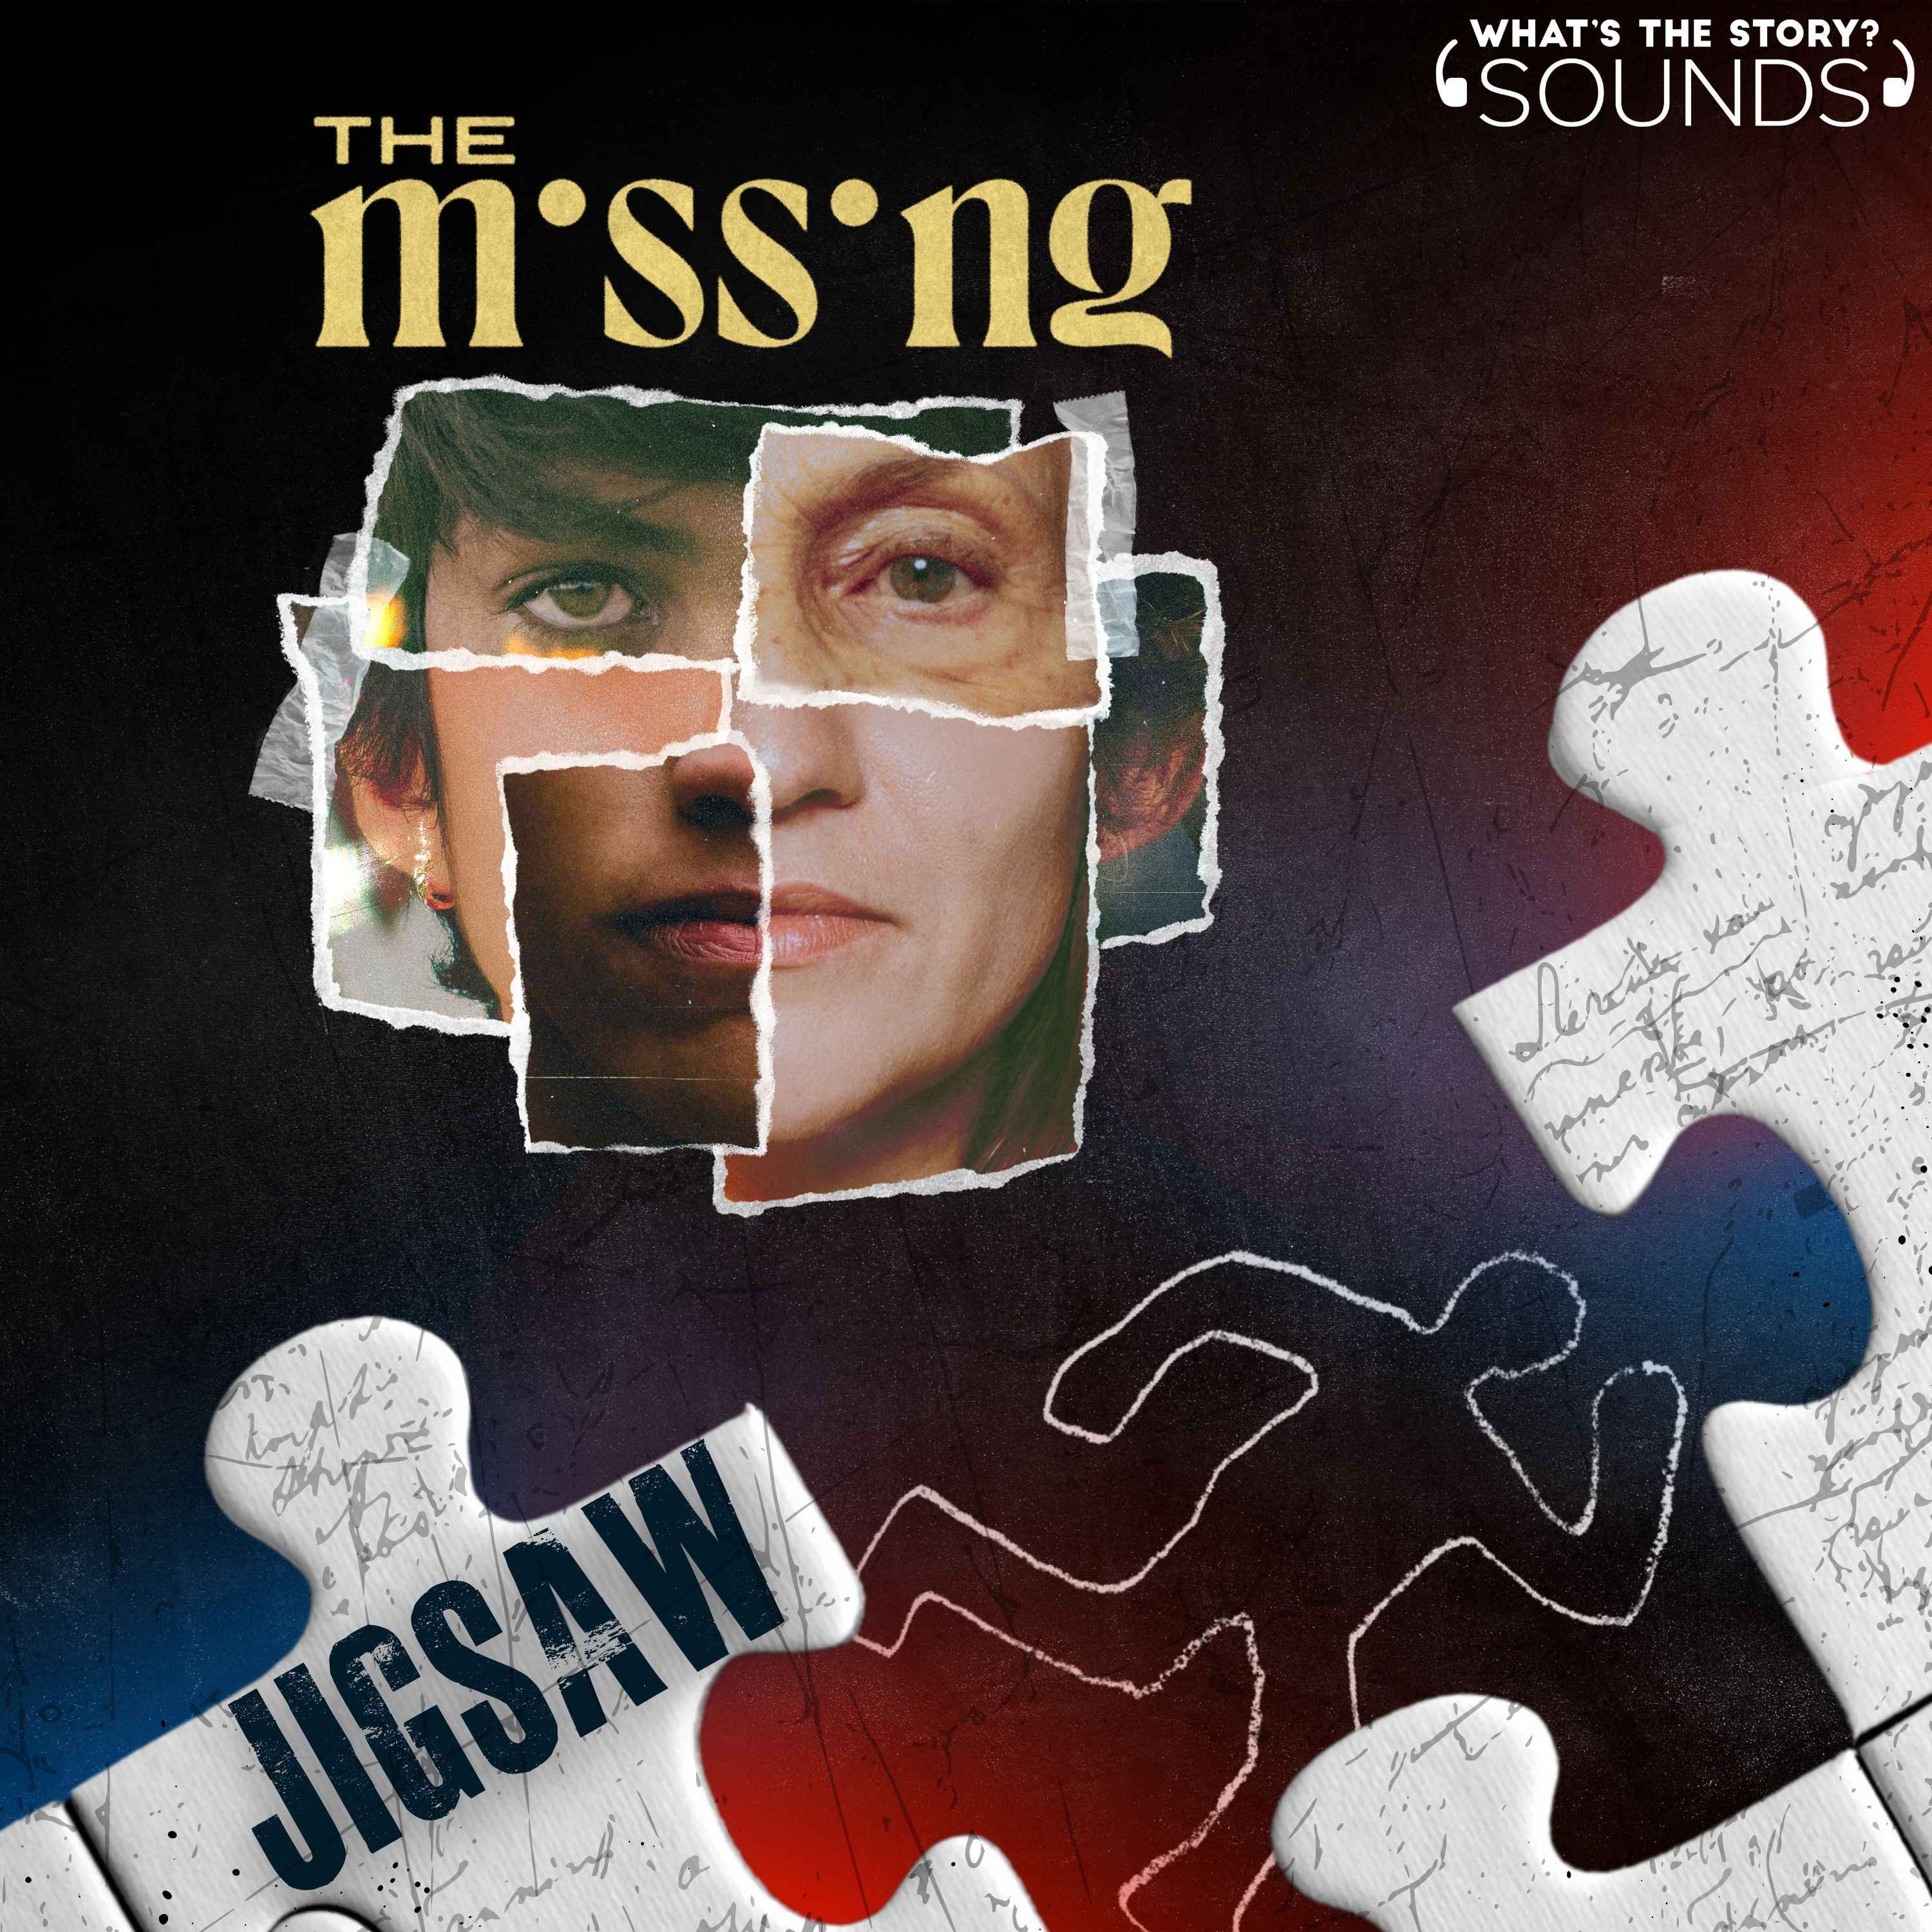 The Missing podcast show image